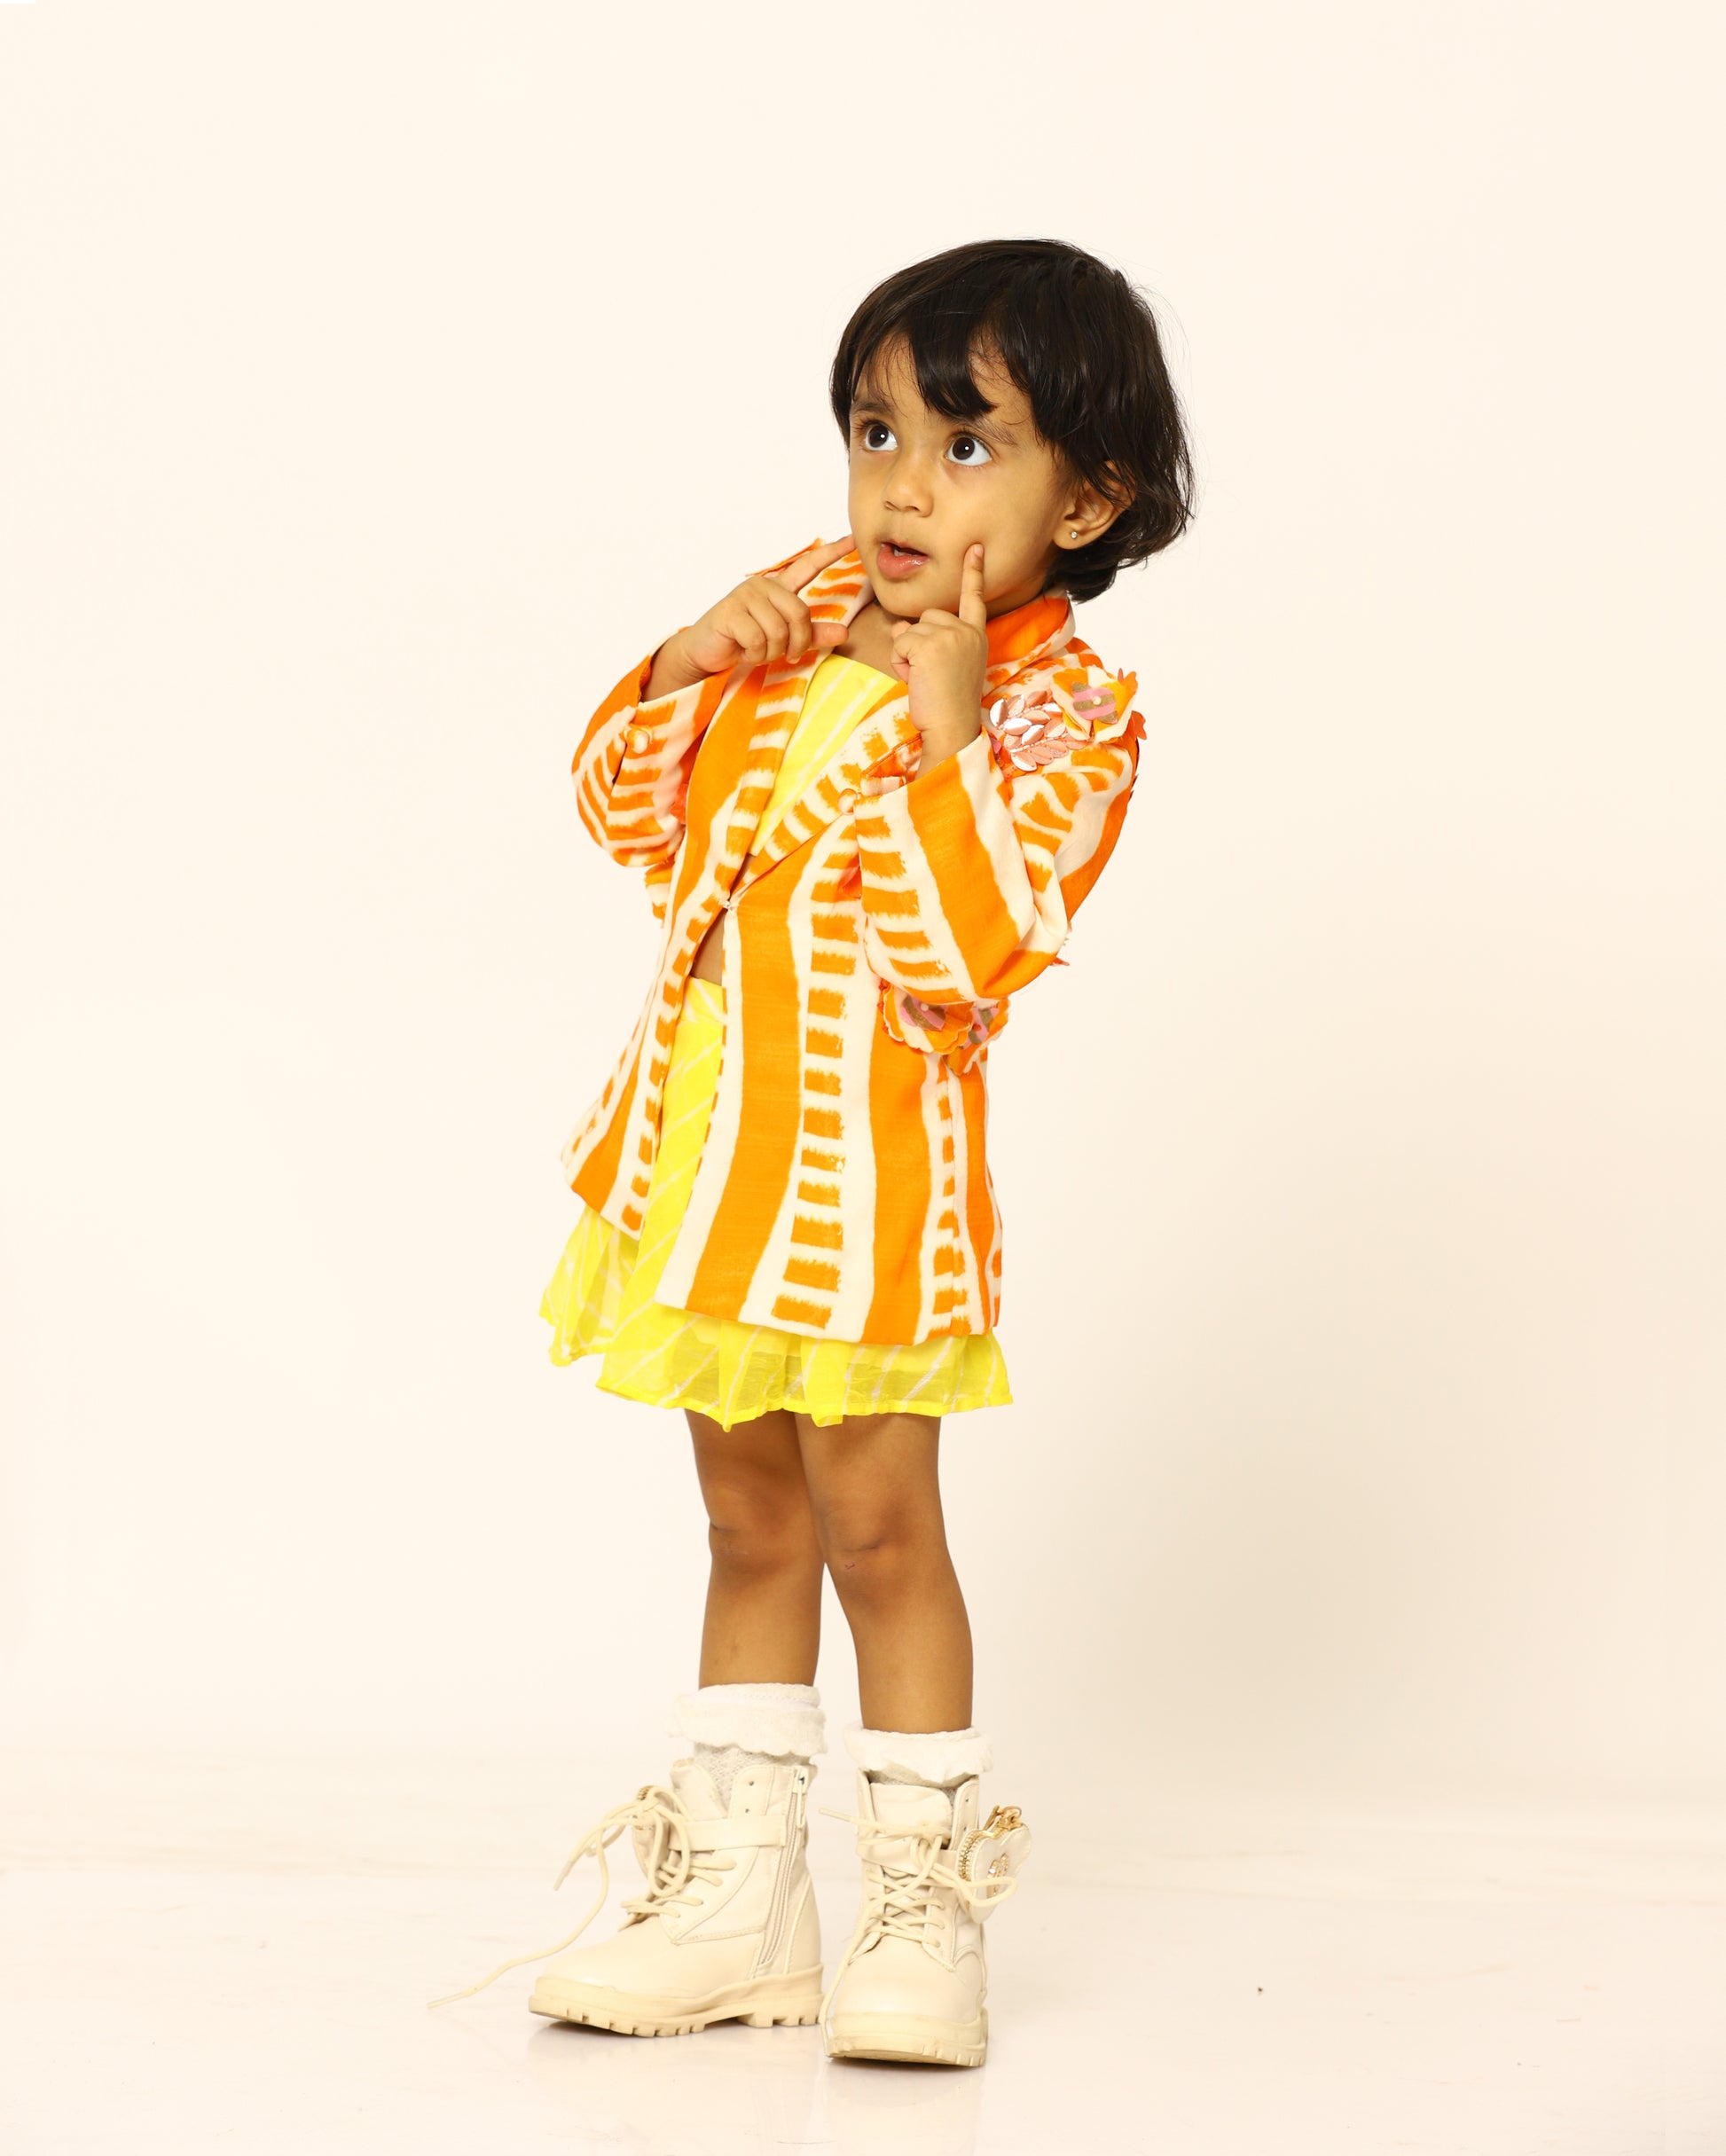 orange + candy + blazer + striped + flowers + yellow + striped + co - ord + bow + socks + shoe + party + cheerful + jump + front